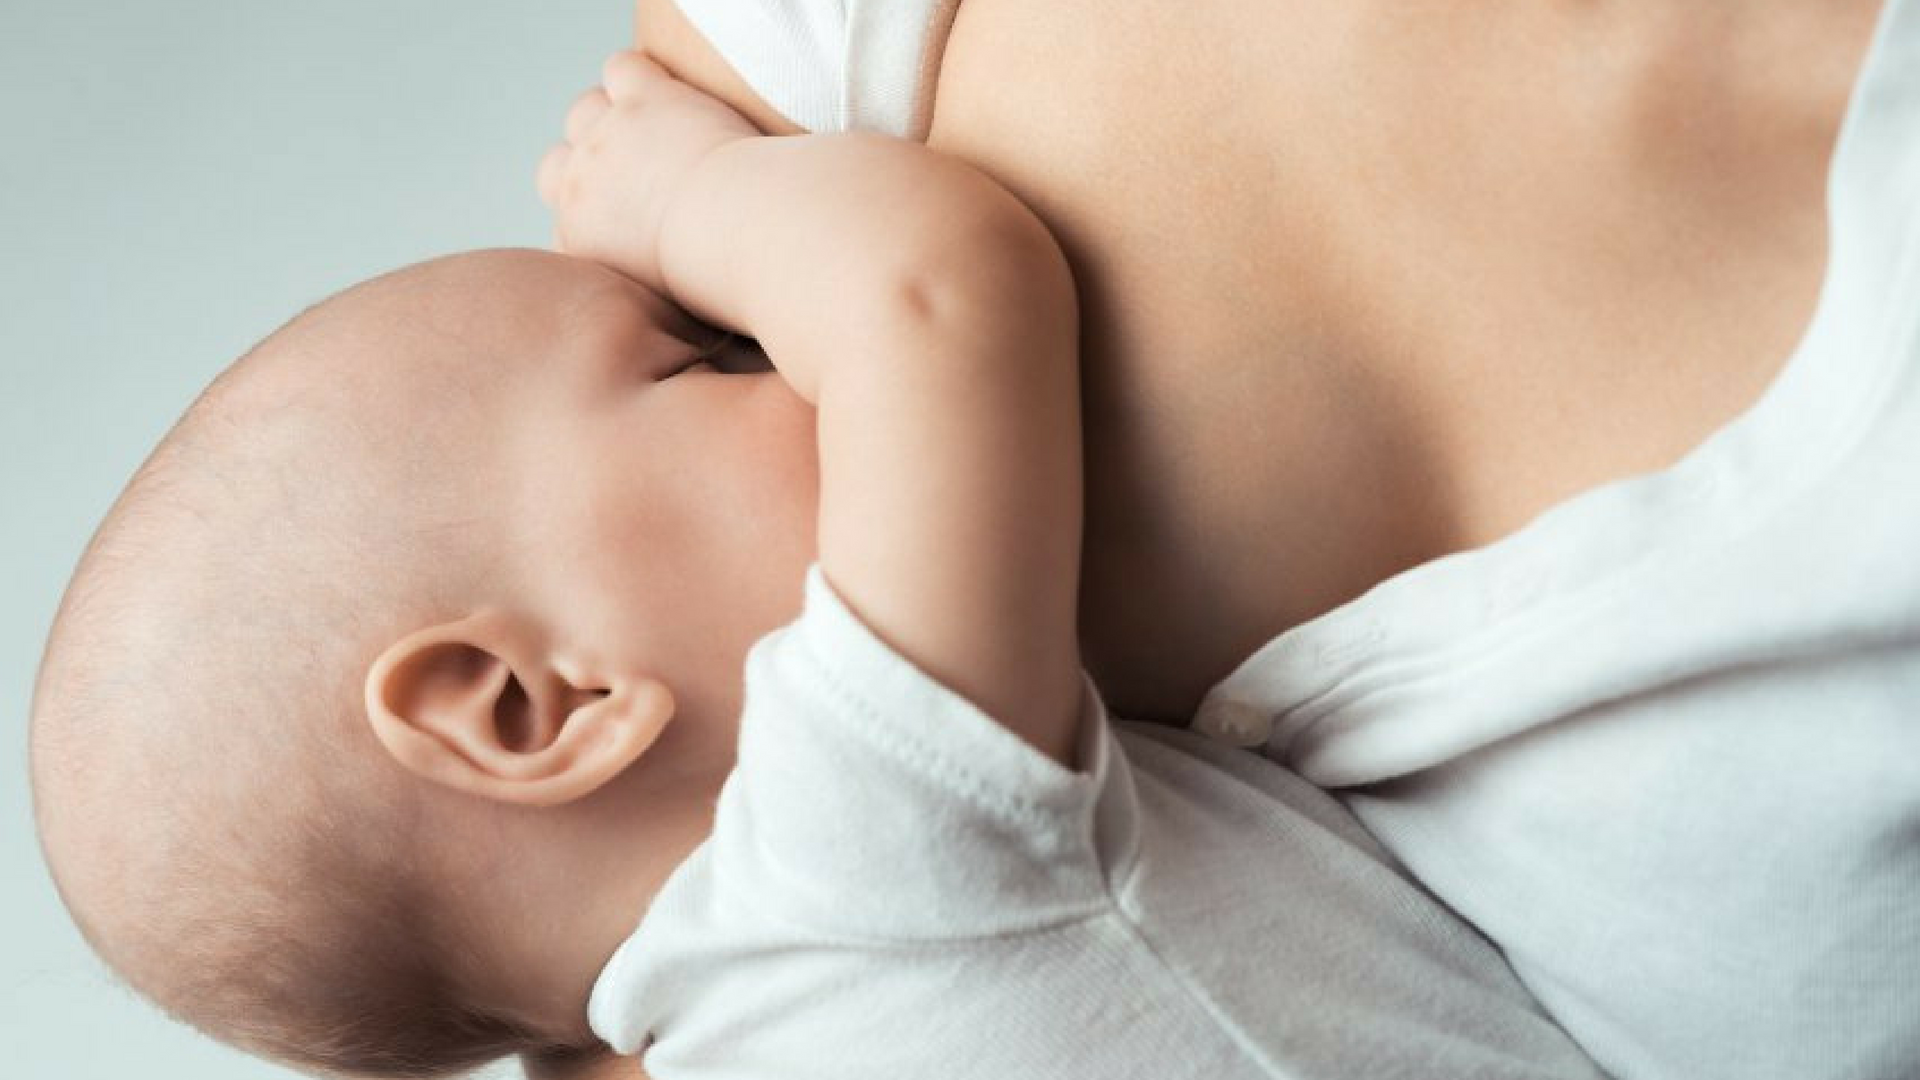 6 Uses For Breastmilk You Probably Hadn't Thought Of-Li'l Zippers-Baby Zip Rompers